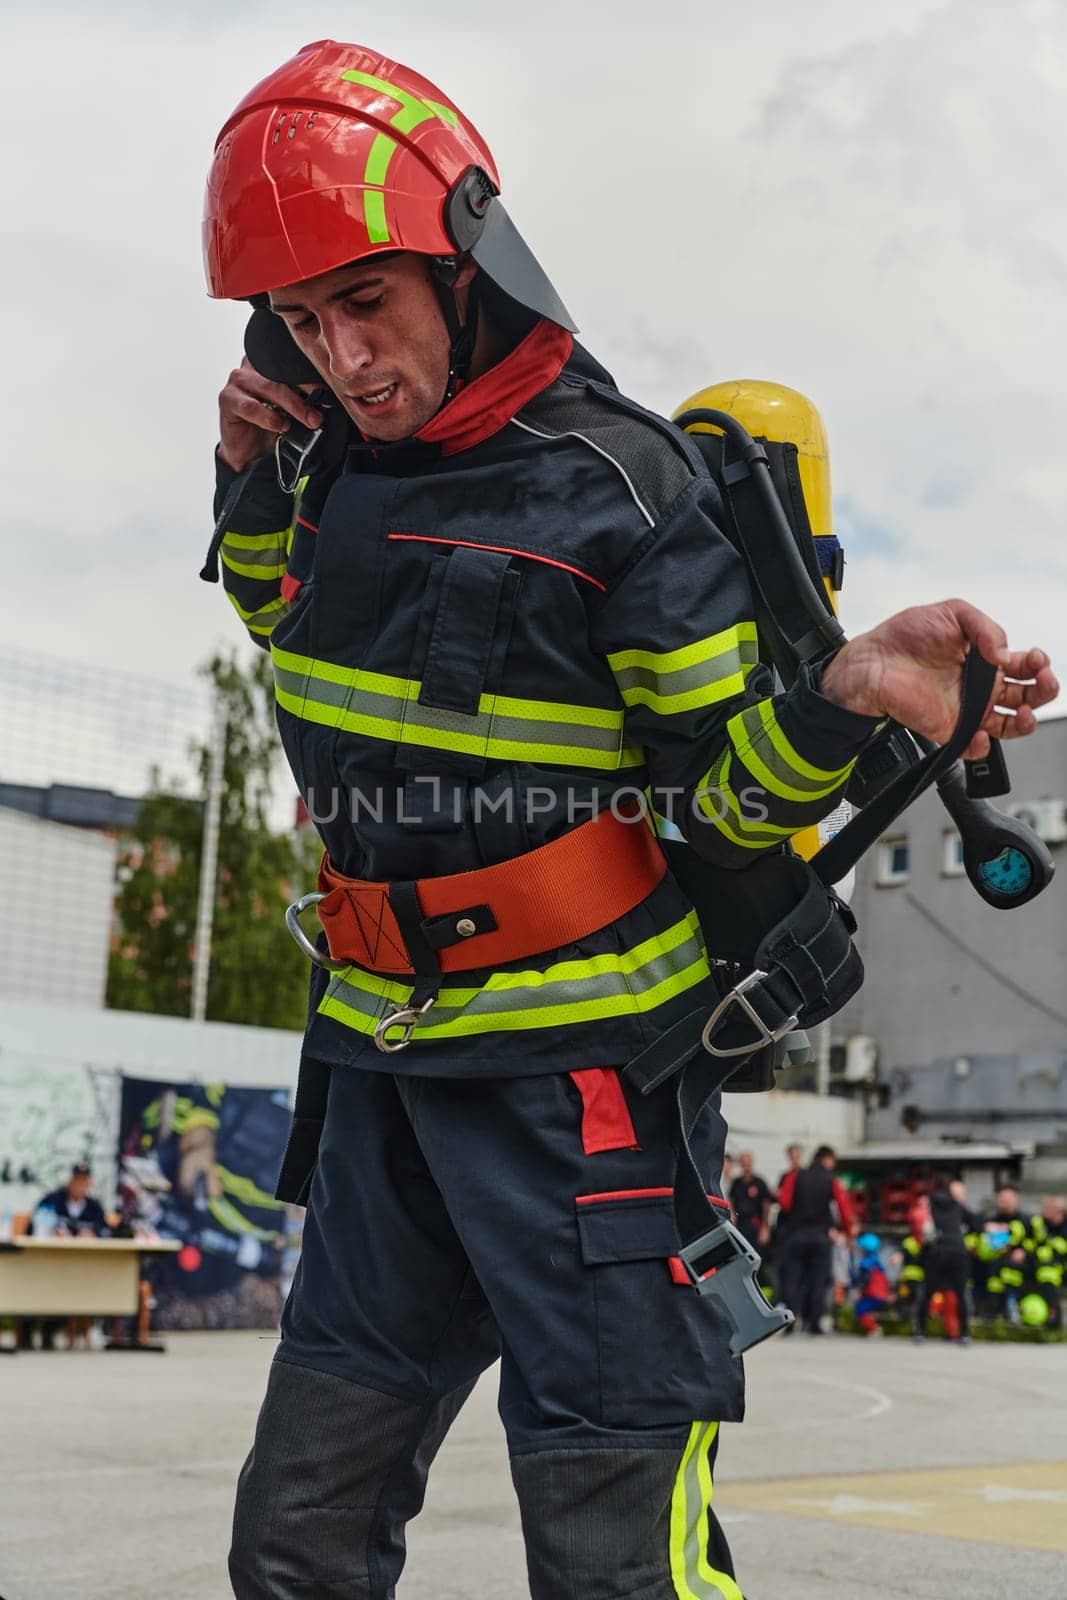 A professional firefighter dons his protective gear, preparing to respond to an emergency call.